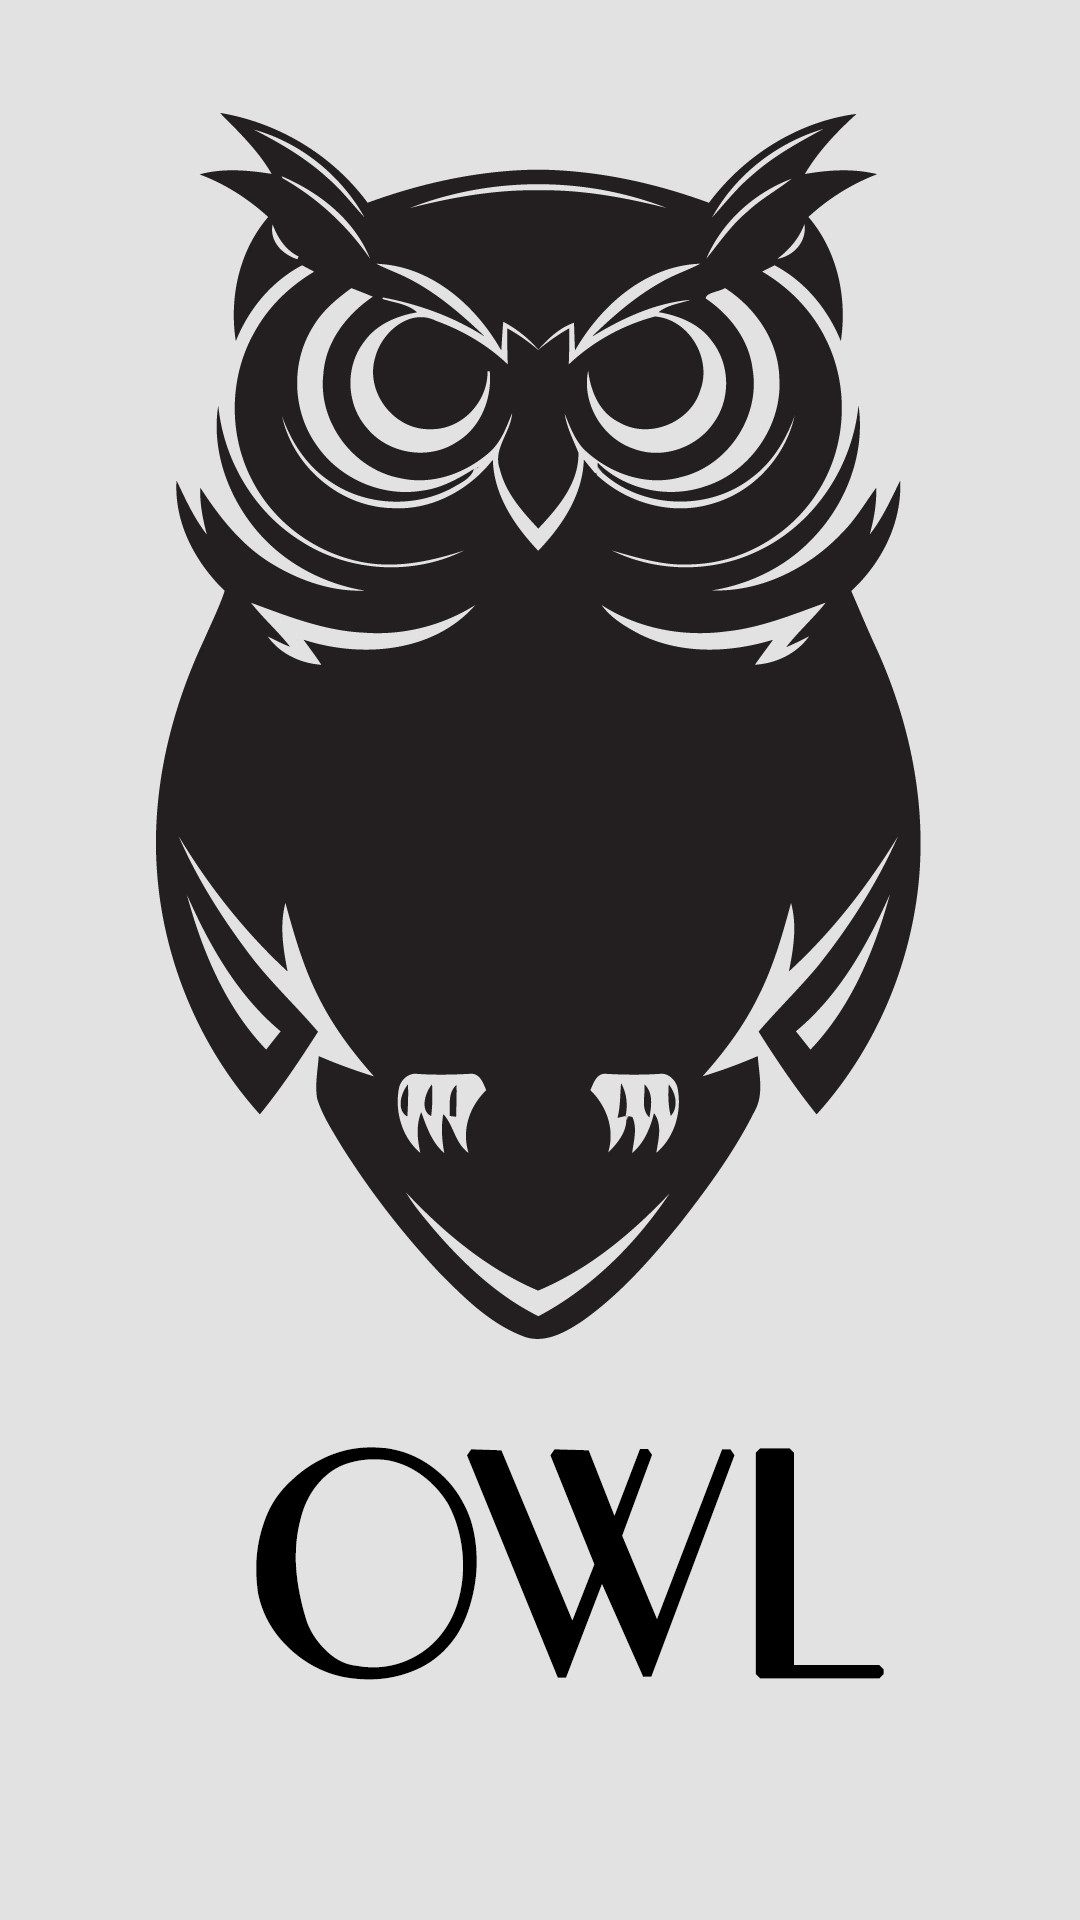 1080x1920 Owl wallpaper! just because ...